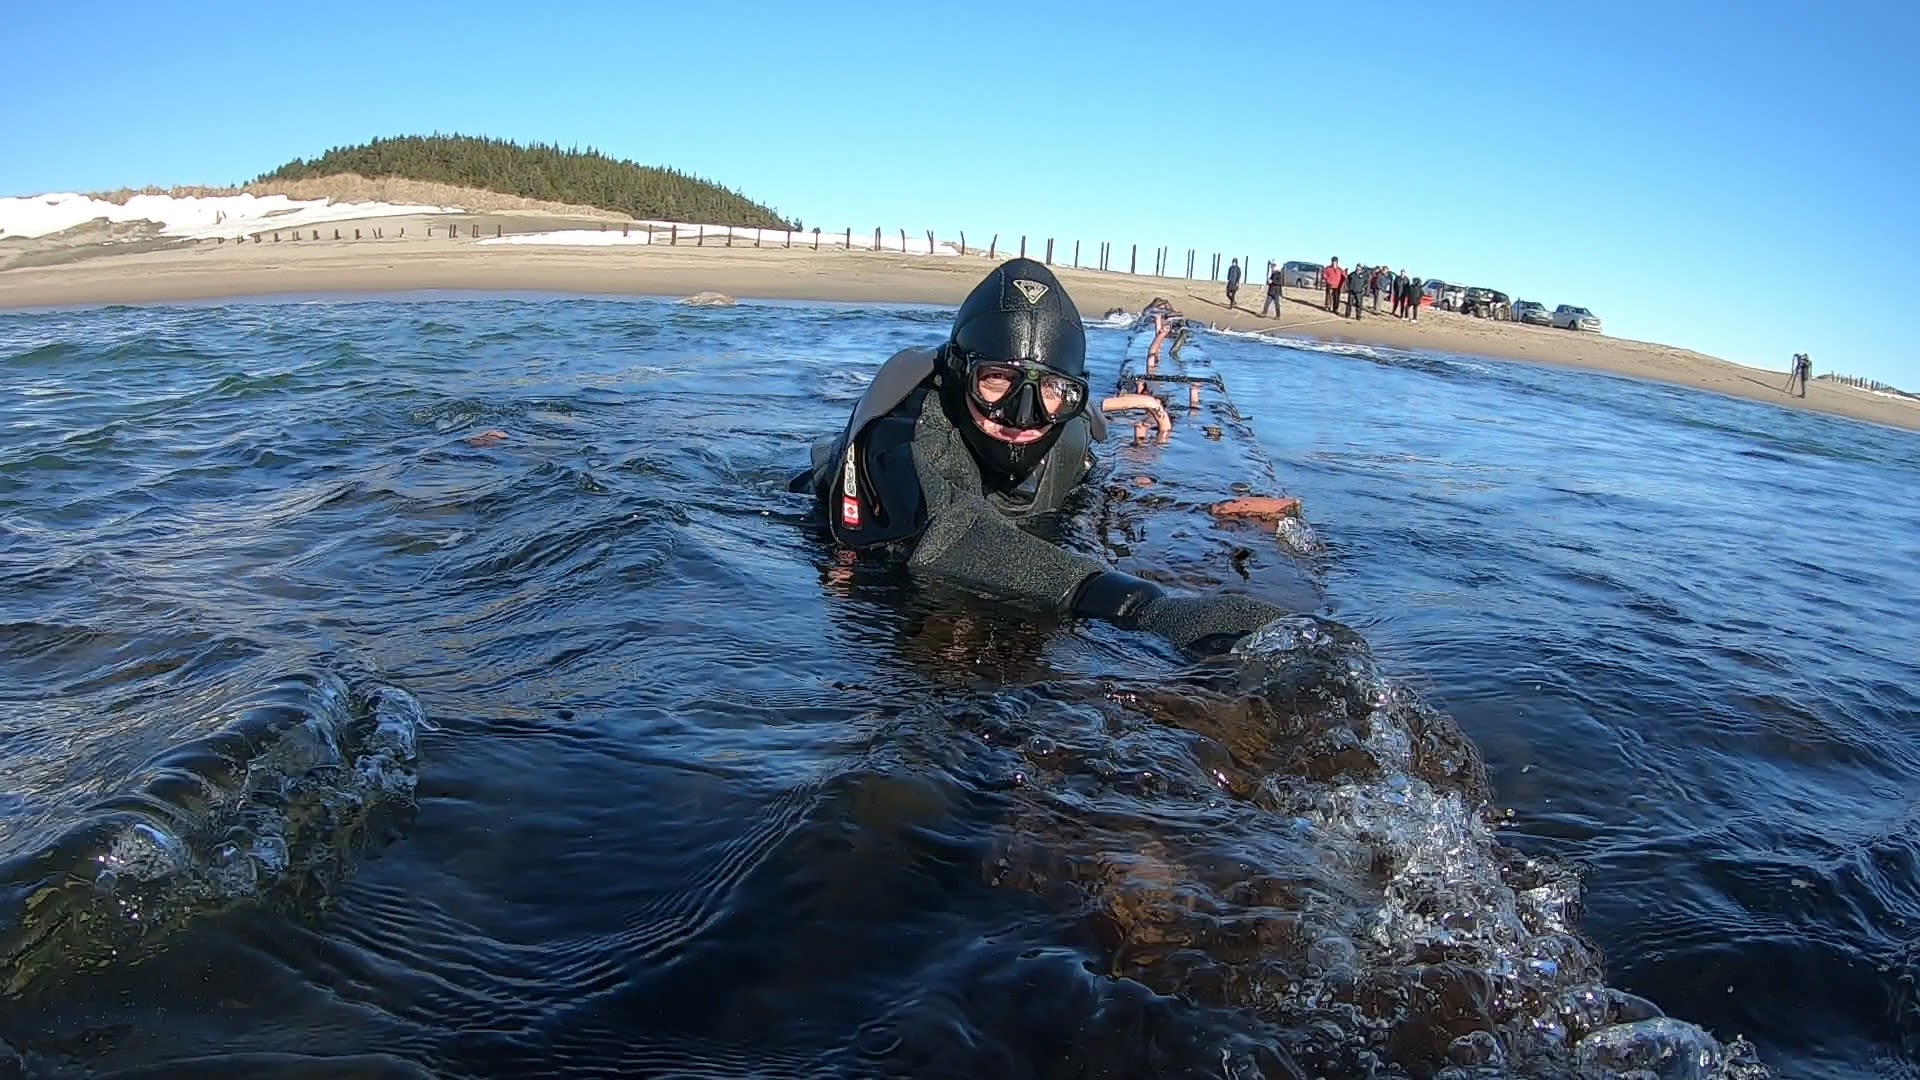 Shawn Bath, of the Clean Harbours Initiative, works to secure the shipwreck in Cape Ray, Newfoundland, Canada.